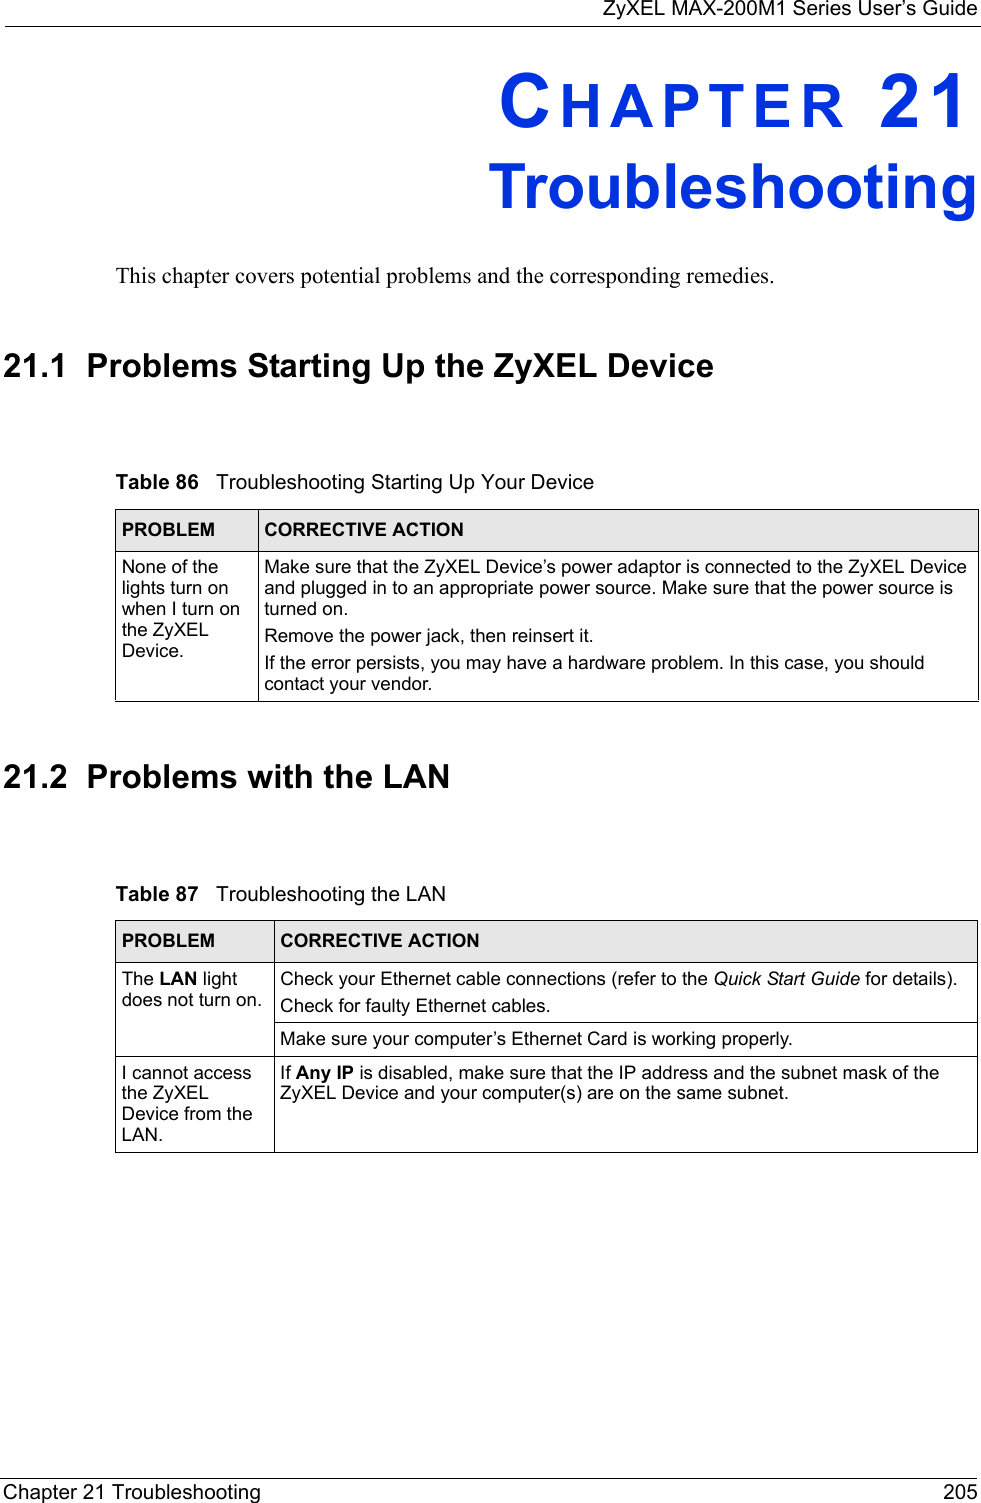 ZyXEL MAX-200M1 Series User’s GuideChapter 21 Troubleshooting 205CHAPTER 21TroubleshootingThis chapter covers potential problems and the corresponding remedies.21.1  Problems Starting Up the ZyXEL Device21.2  Problems with the LANTable 86   Troubleshooting Starting Up Your DevicePROBLEM CORRECTIVE ACTIONNone of the lights turn on when I turn on the ZyXEL Device.Make sure that the ZyXEL Device’s power adaptor is connected to the ZyXEL Device and plugged in to an appropriate power source. Make sure that the power source is turned on.Remove the power jack, then reinsert it.If the error persists, you may have a hardware problem. In this case, you should contact your vendor.Table 87   Troubleshooting the LANPROBLEM CORRECTIVE ACTIONThe LAN light does not turn on.Check your Ethernet cable connections (refer to the Quick Start Guide for details). Check for faulty Ethernet cables.Make sure your computer’s Ethernet Card is working properly.I cannot access the ZyXEL Device from the LAN. If Any IP is disabled, make sure that the IP address and the subnet mask of the ZyXEL Device and your computer(s) are on the same subnet.